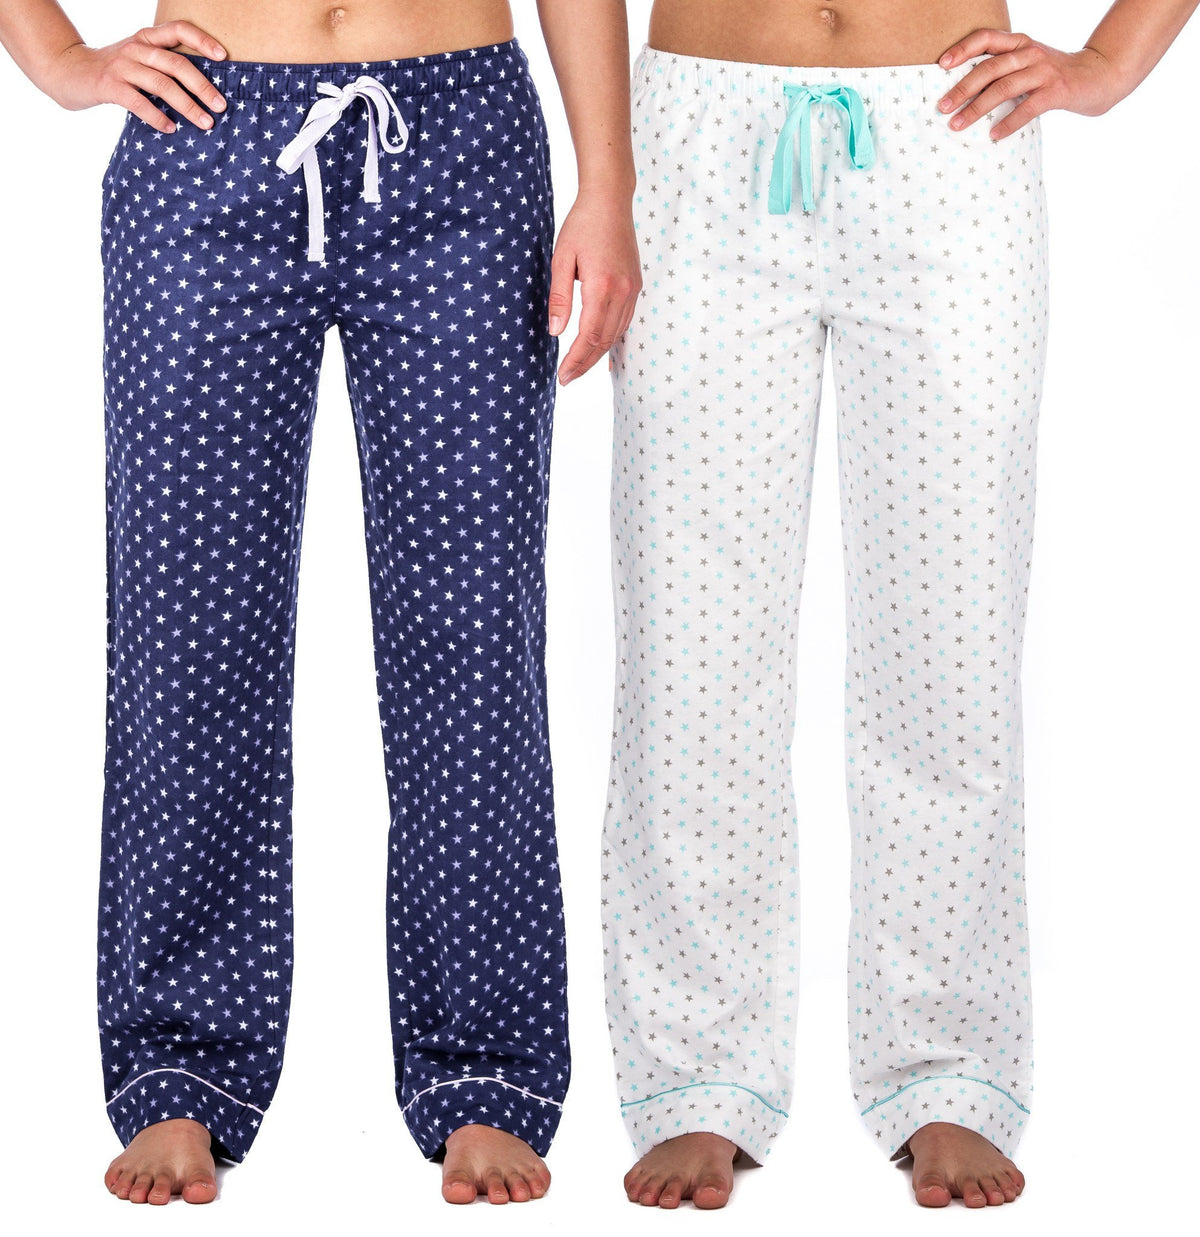 Women's 100% Cotton Flannel Lounge Pants (2-Pack) - Relaxed Fit - Stars Blue/White